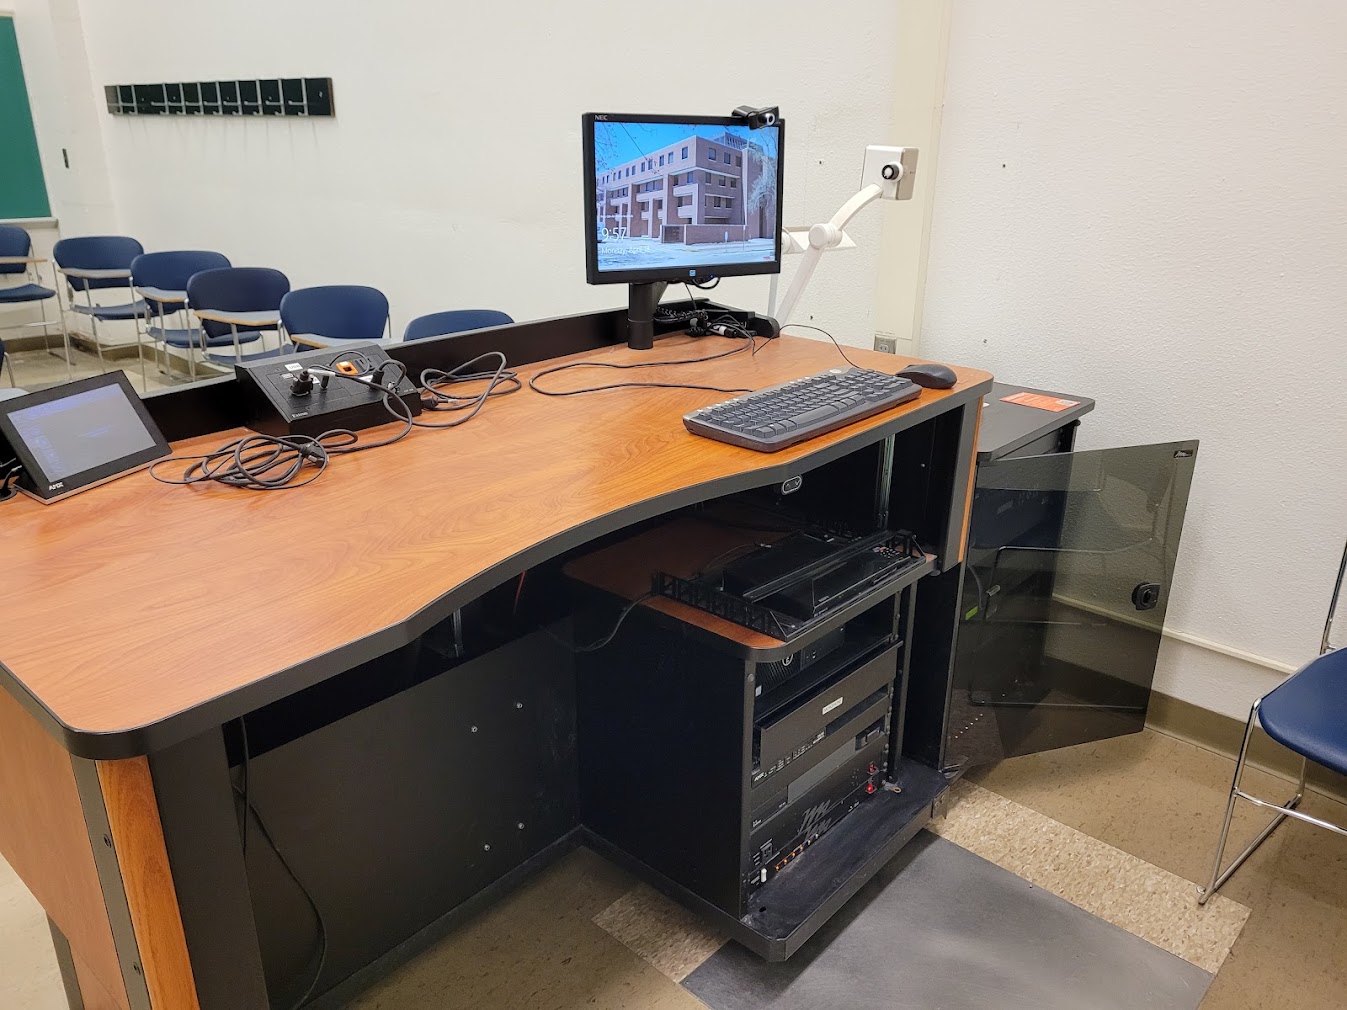 A view of the open cabinet with a computer monitor, VGA and HDMI inputs, touch panel controller, document camera, and audiovisual rack.